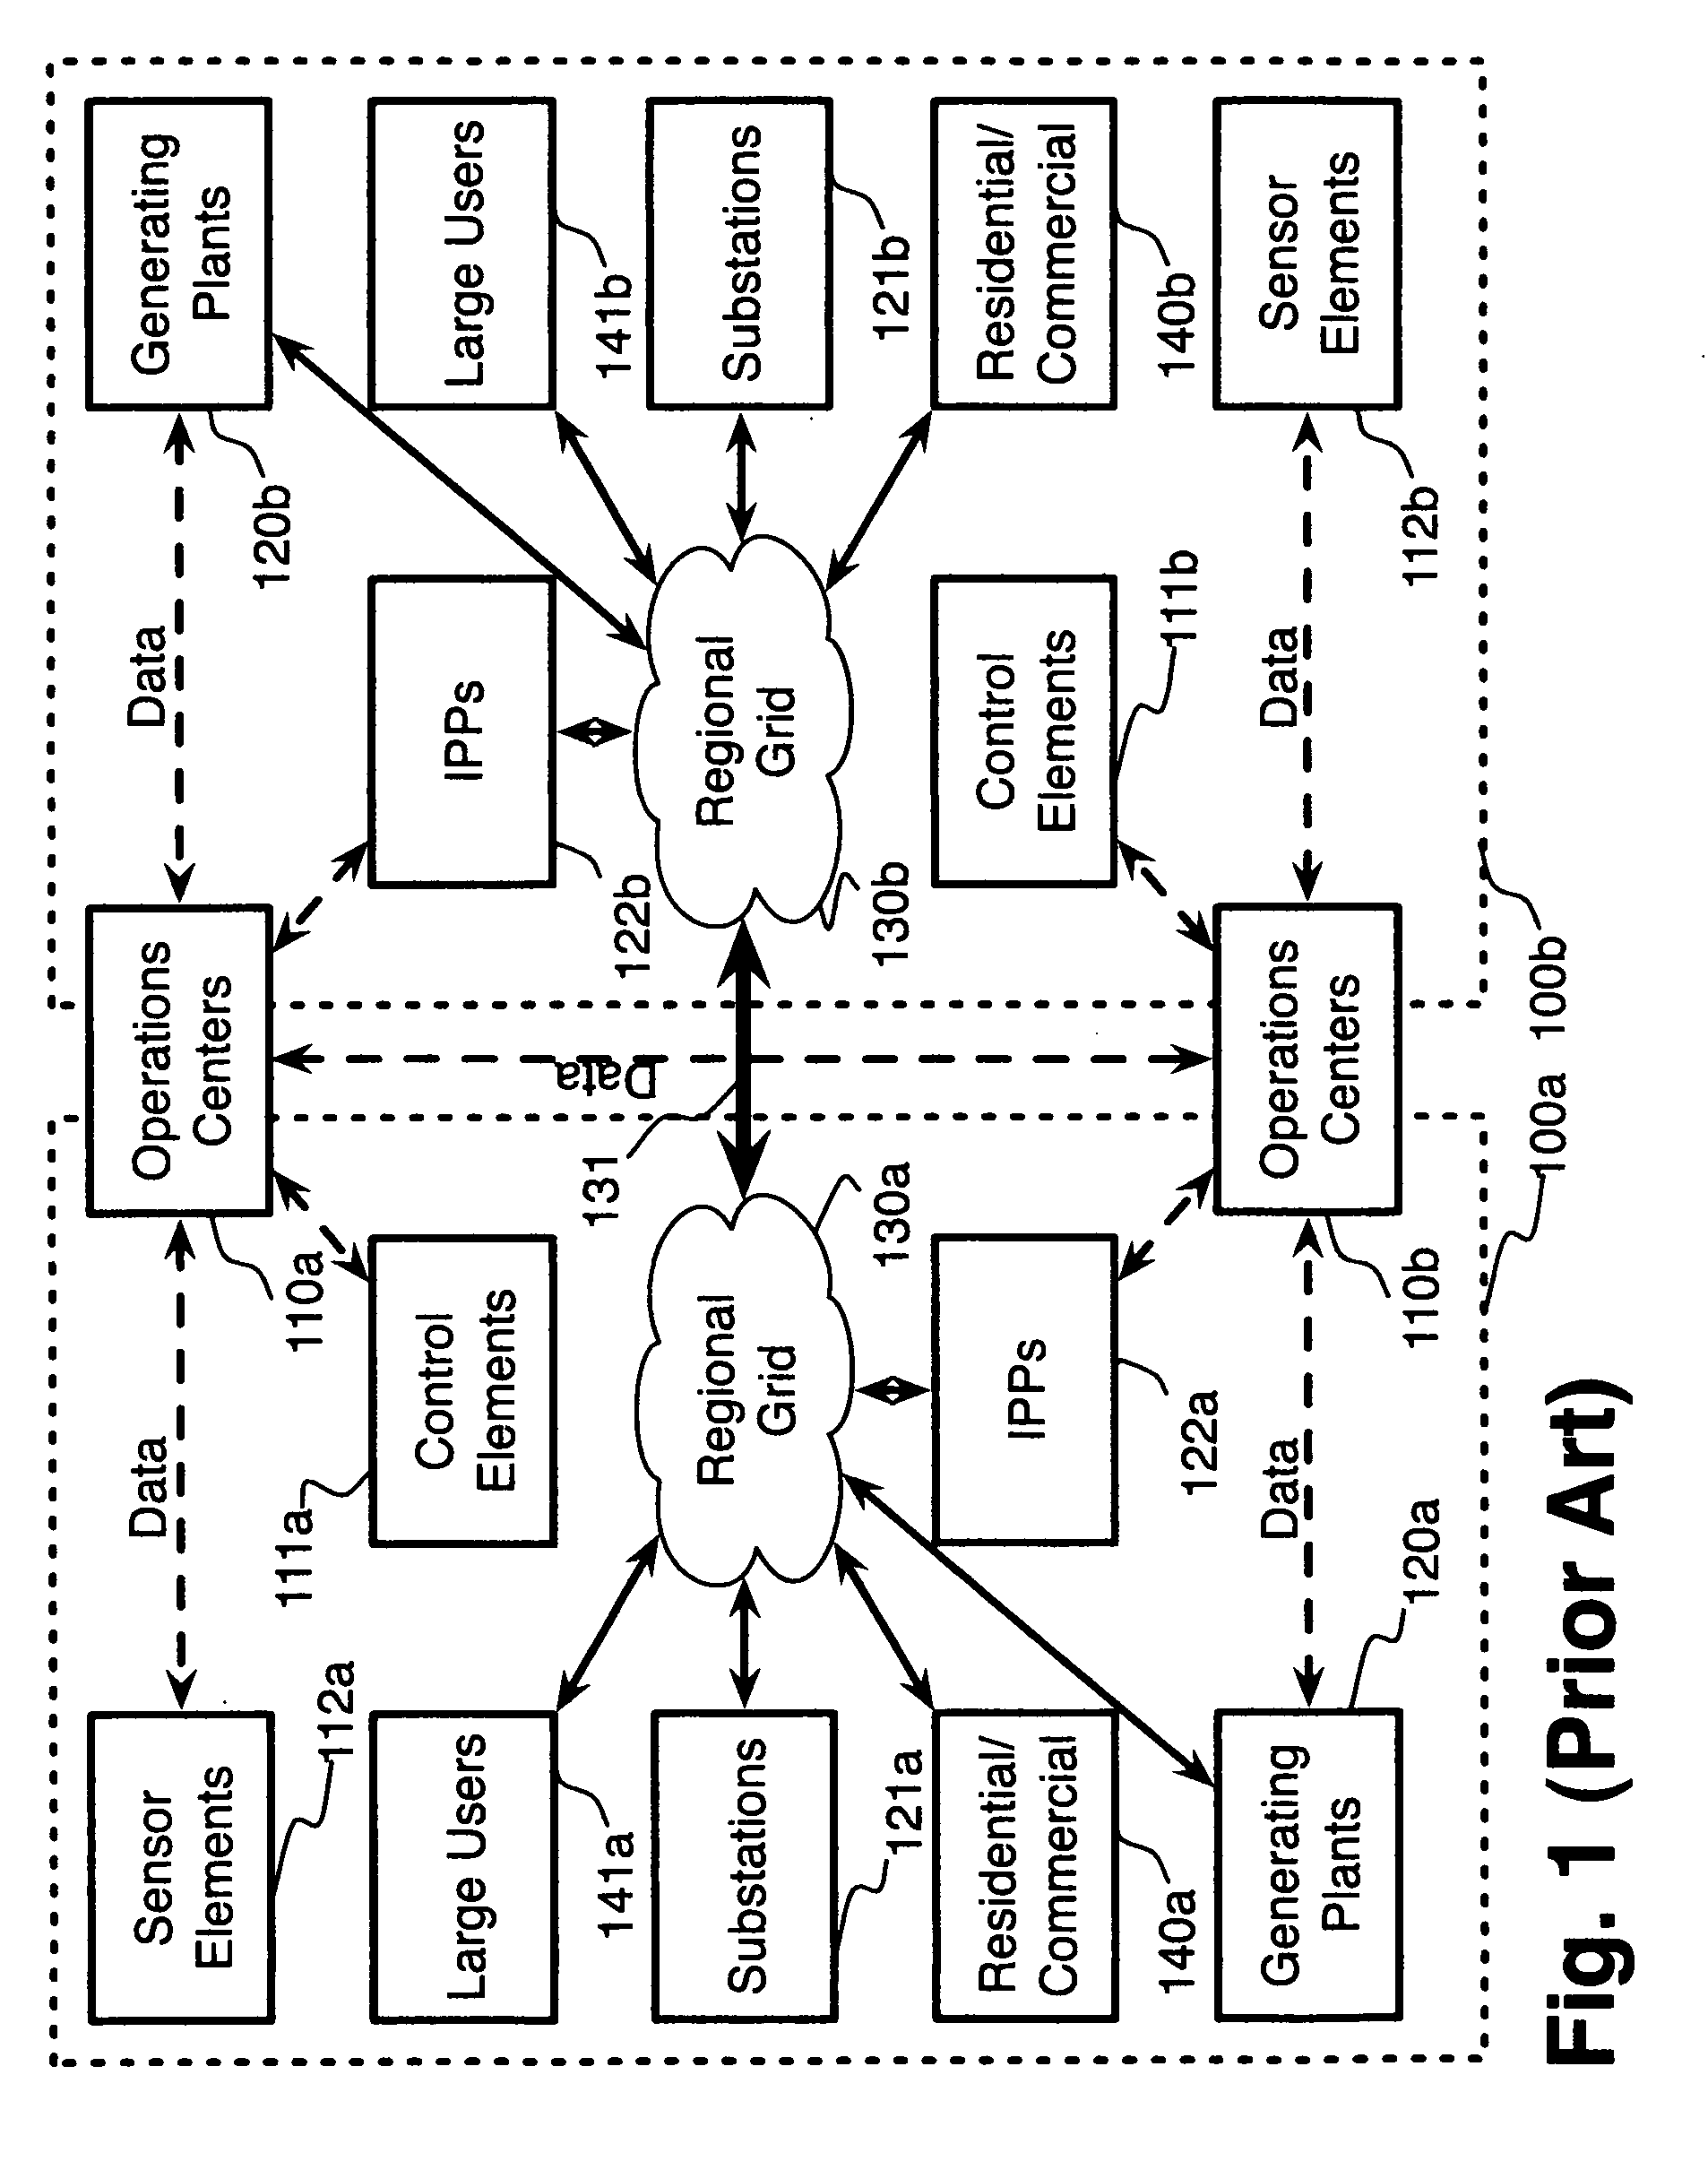 System and method for electric grid utilization and optimization